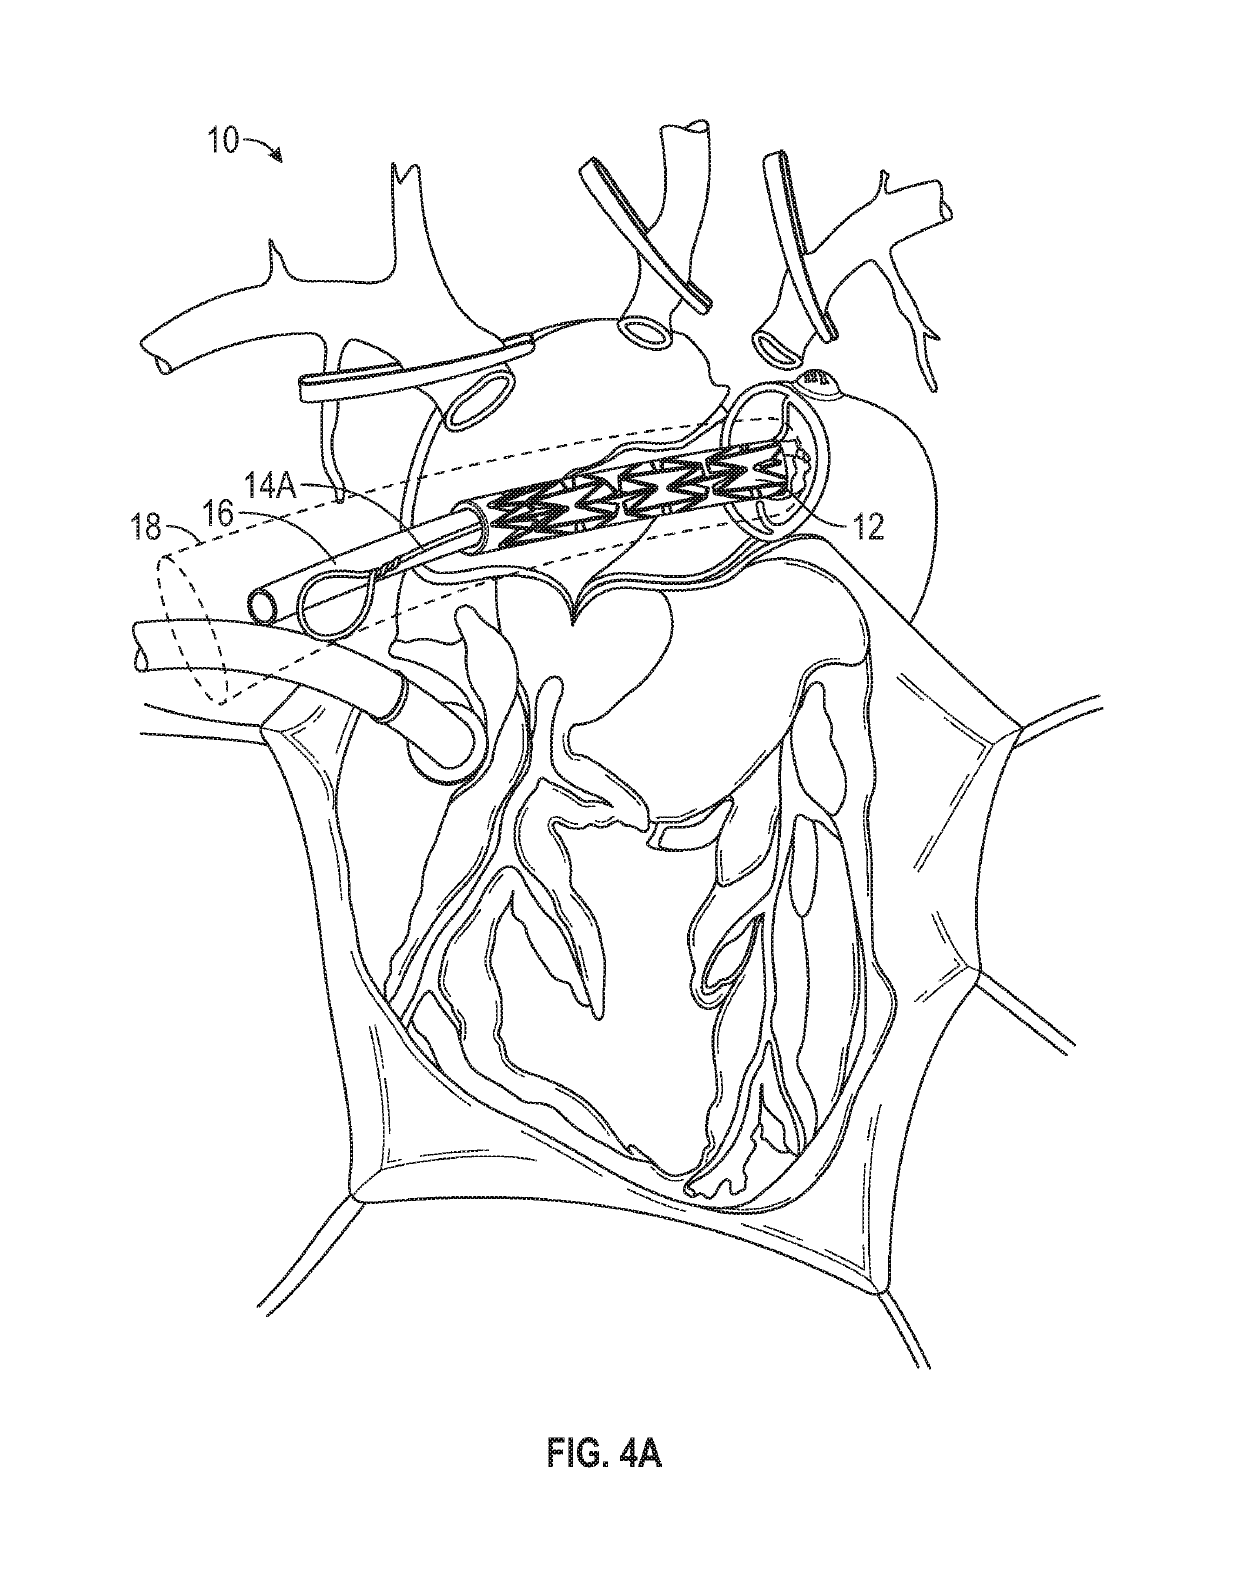 Aortic Arch Embolic Protection Device